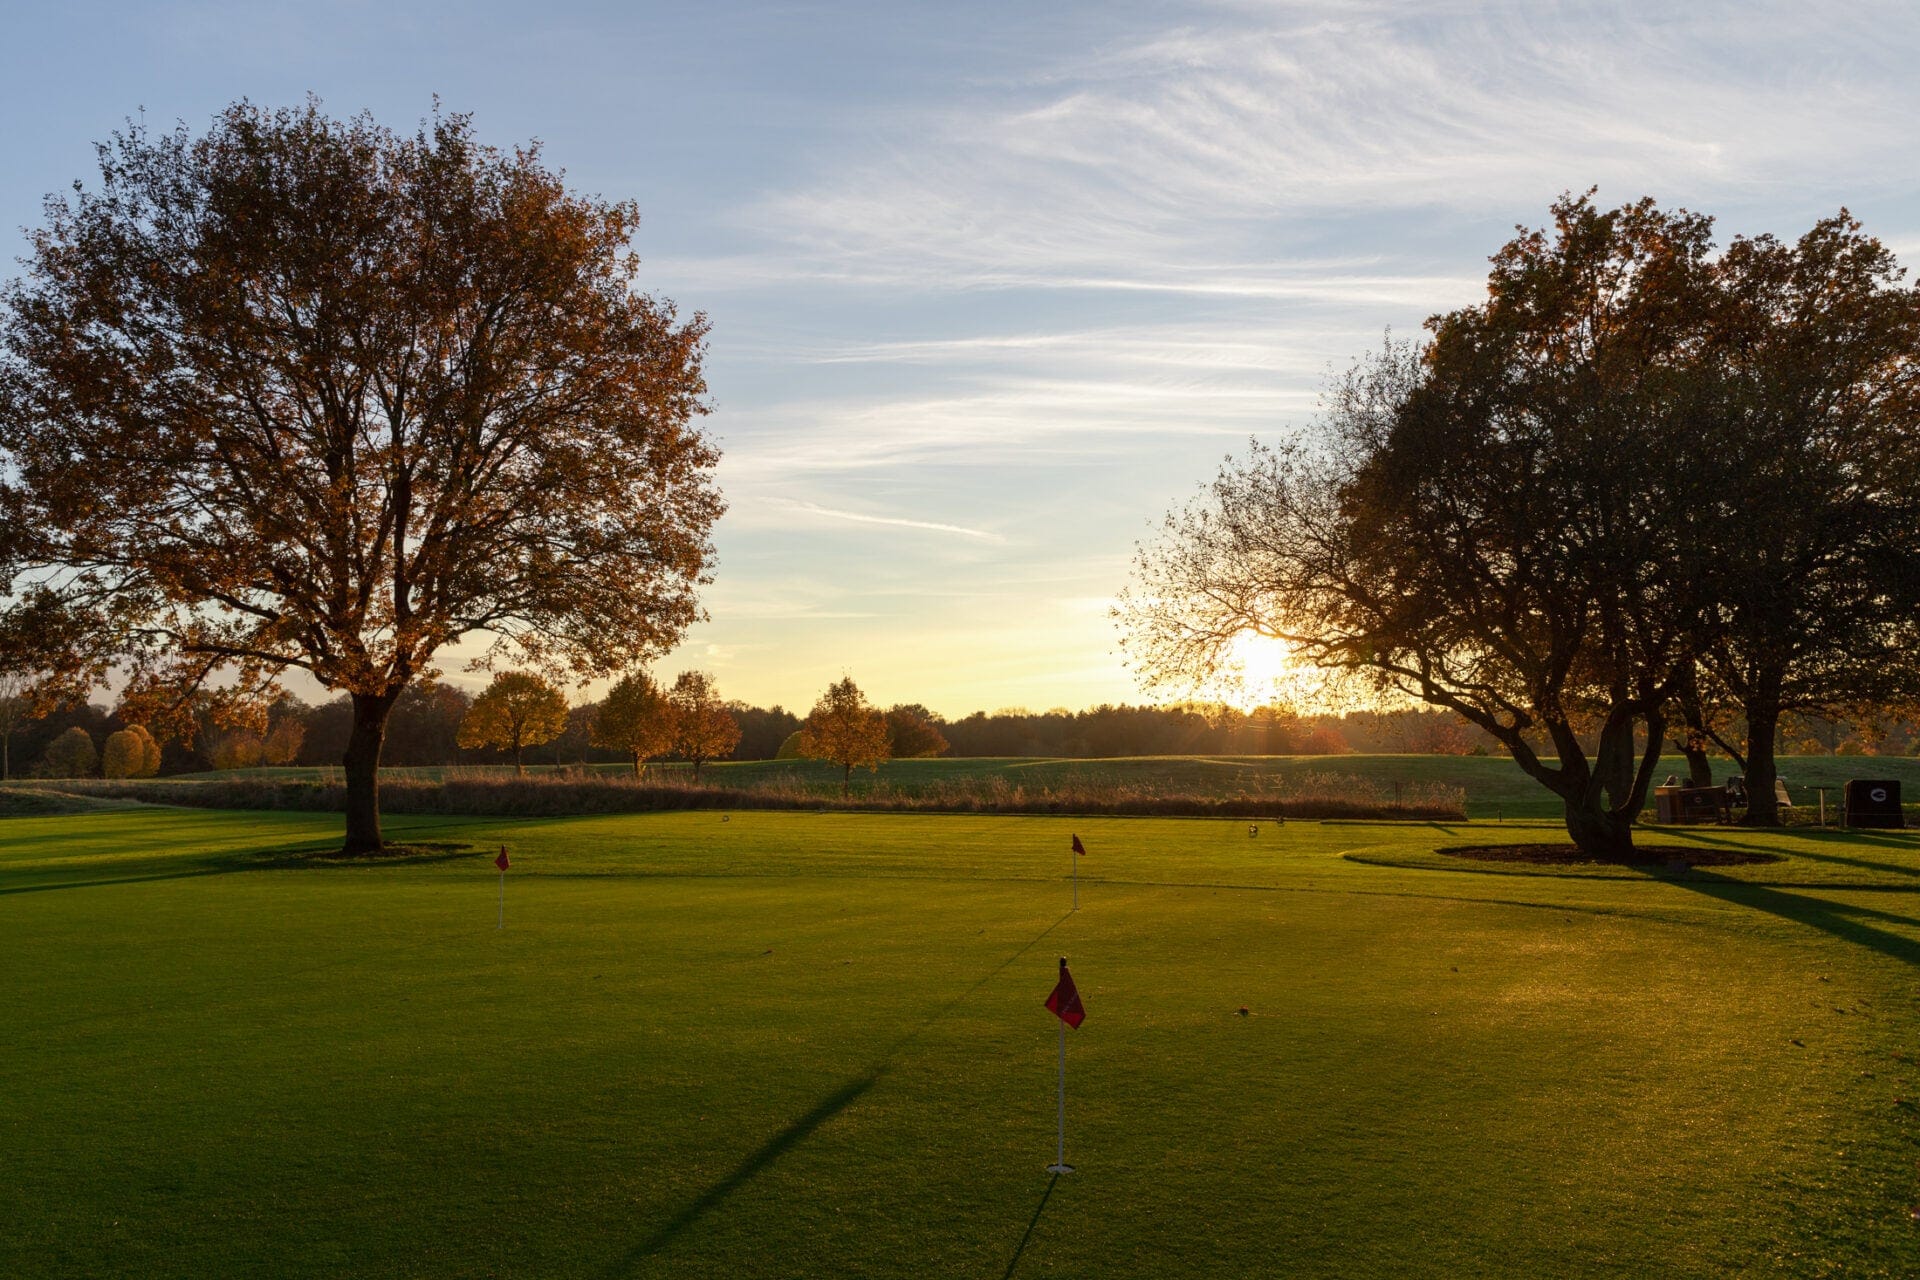 Golf course in autumn and winter